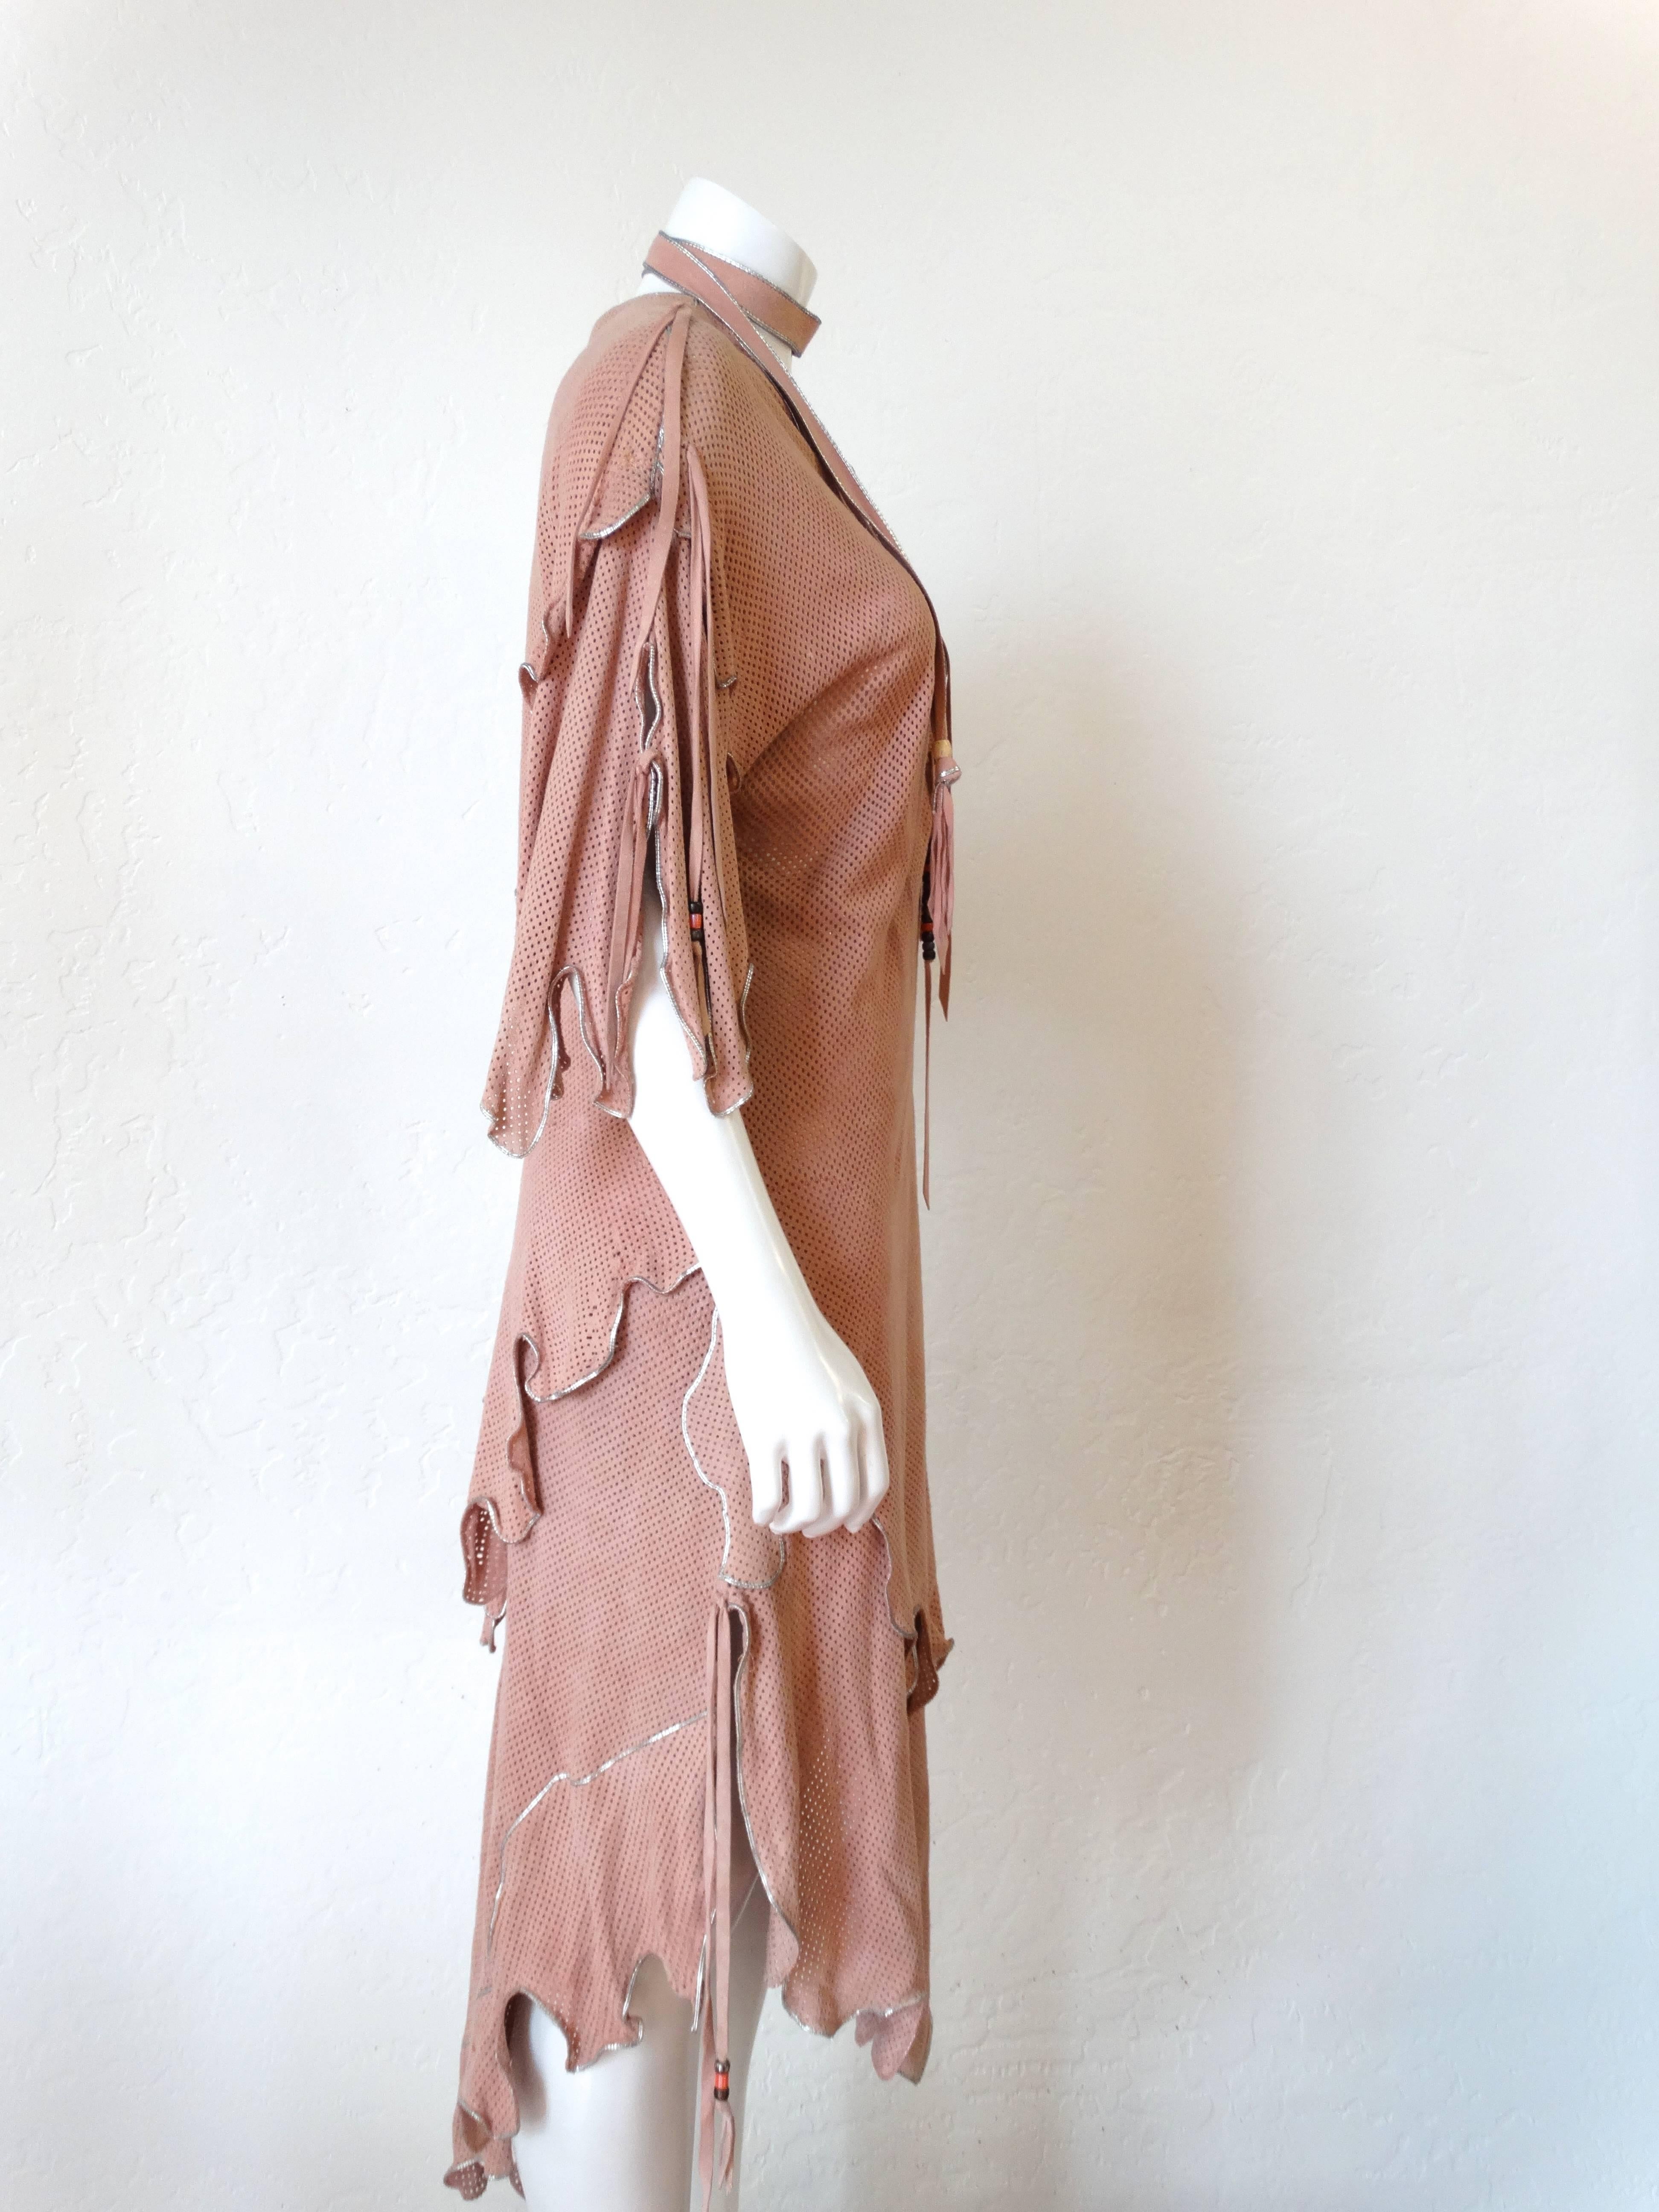 Spectacular early 1970's North Beach Leather Dress entirely hand-crafted with butter-soft perforated leather suede. The dress is meticulous detailed with silver trim that accents the layers of leather, sleeves and hemline. I love the look of this